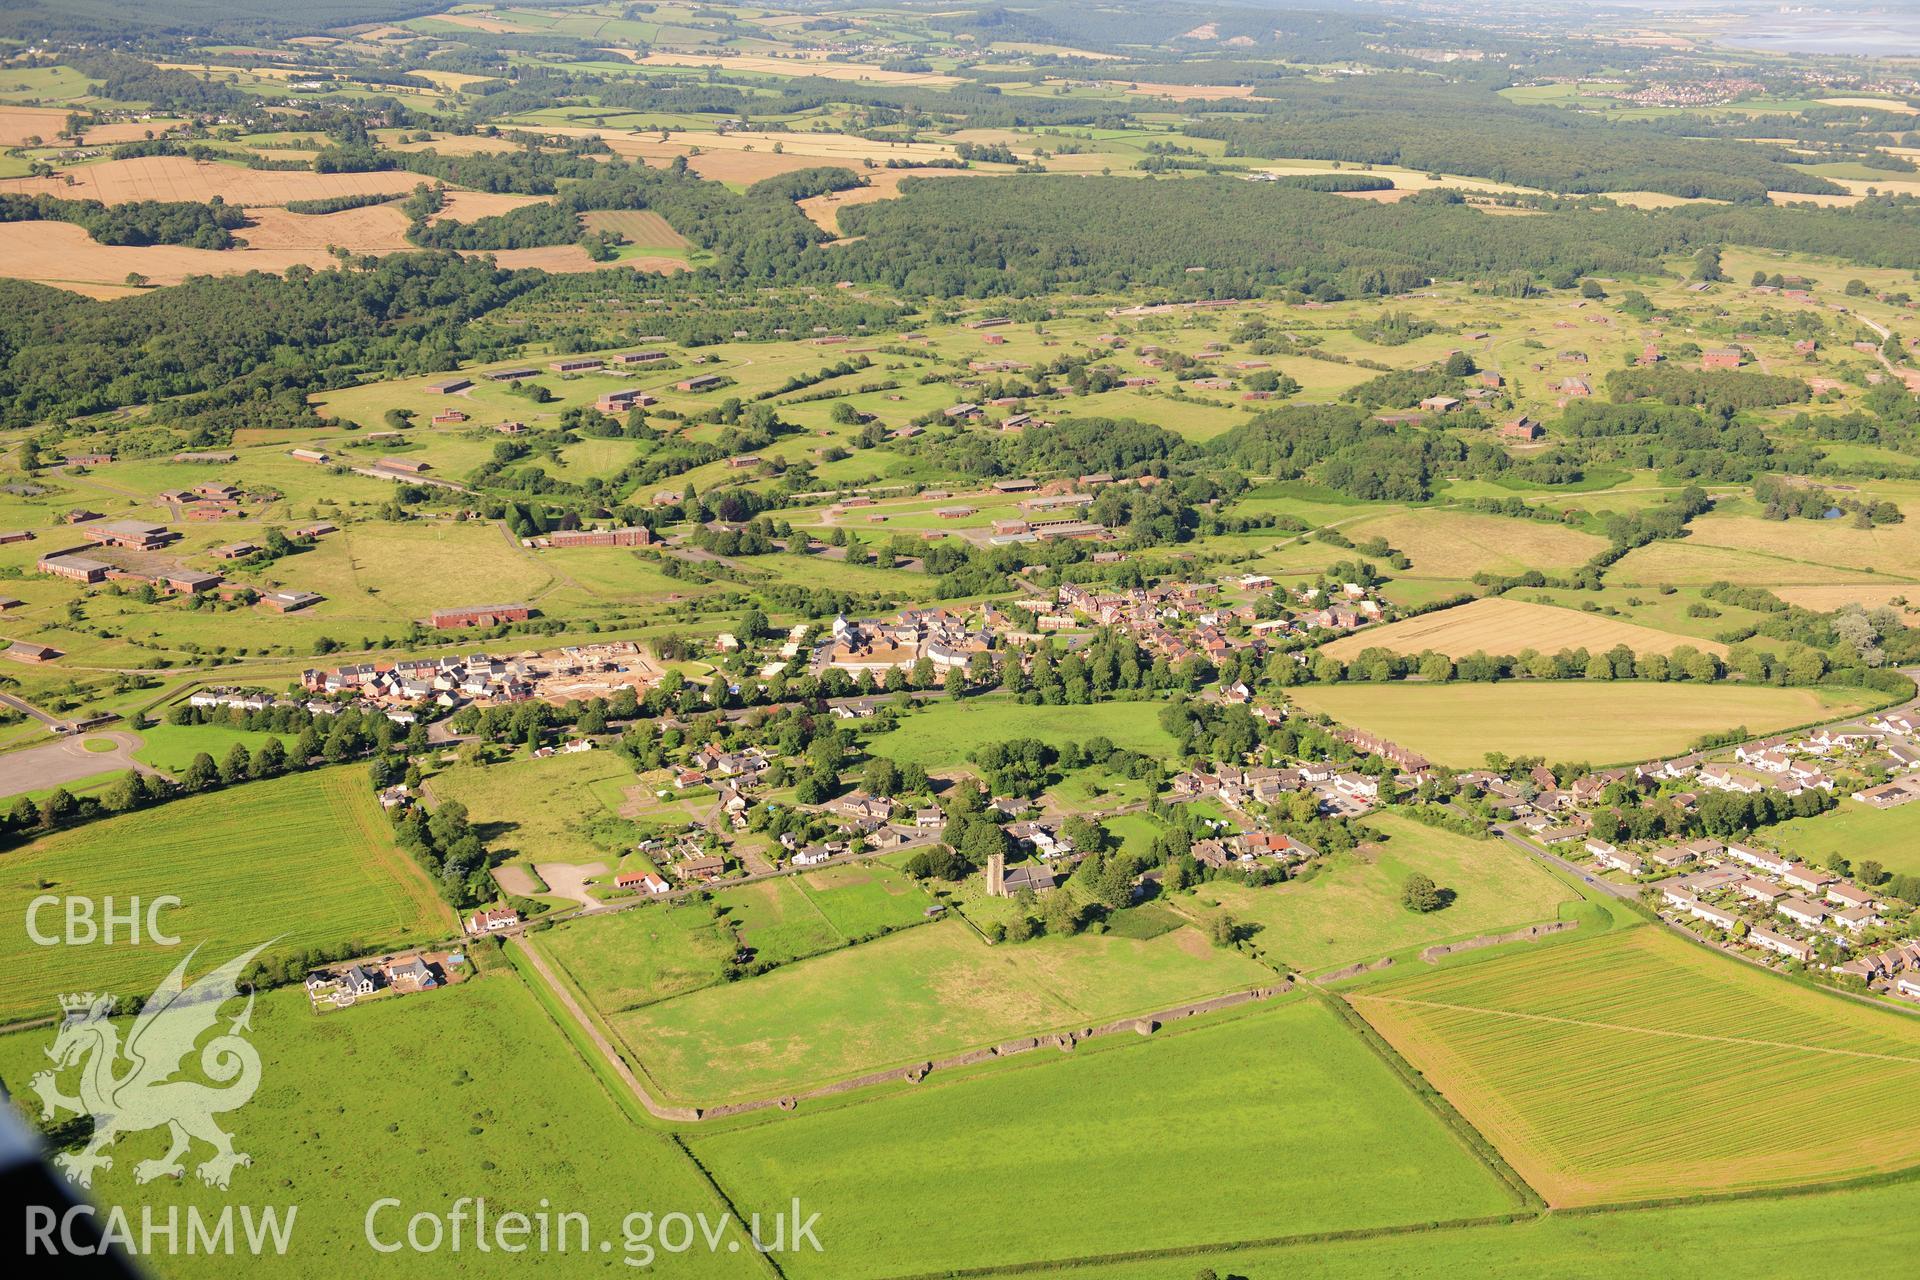 RCAHMW colour oblique photograph of Caerwent Roman town, landscape view from southwest. Taken by Toby Driver on 24/07/2012.